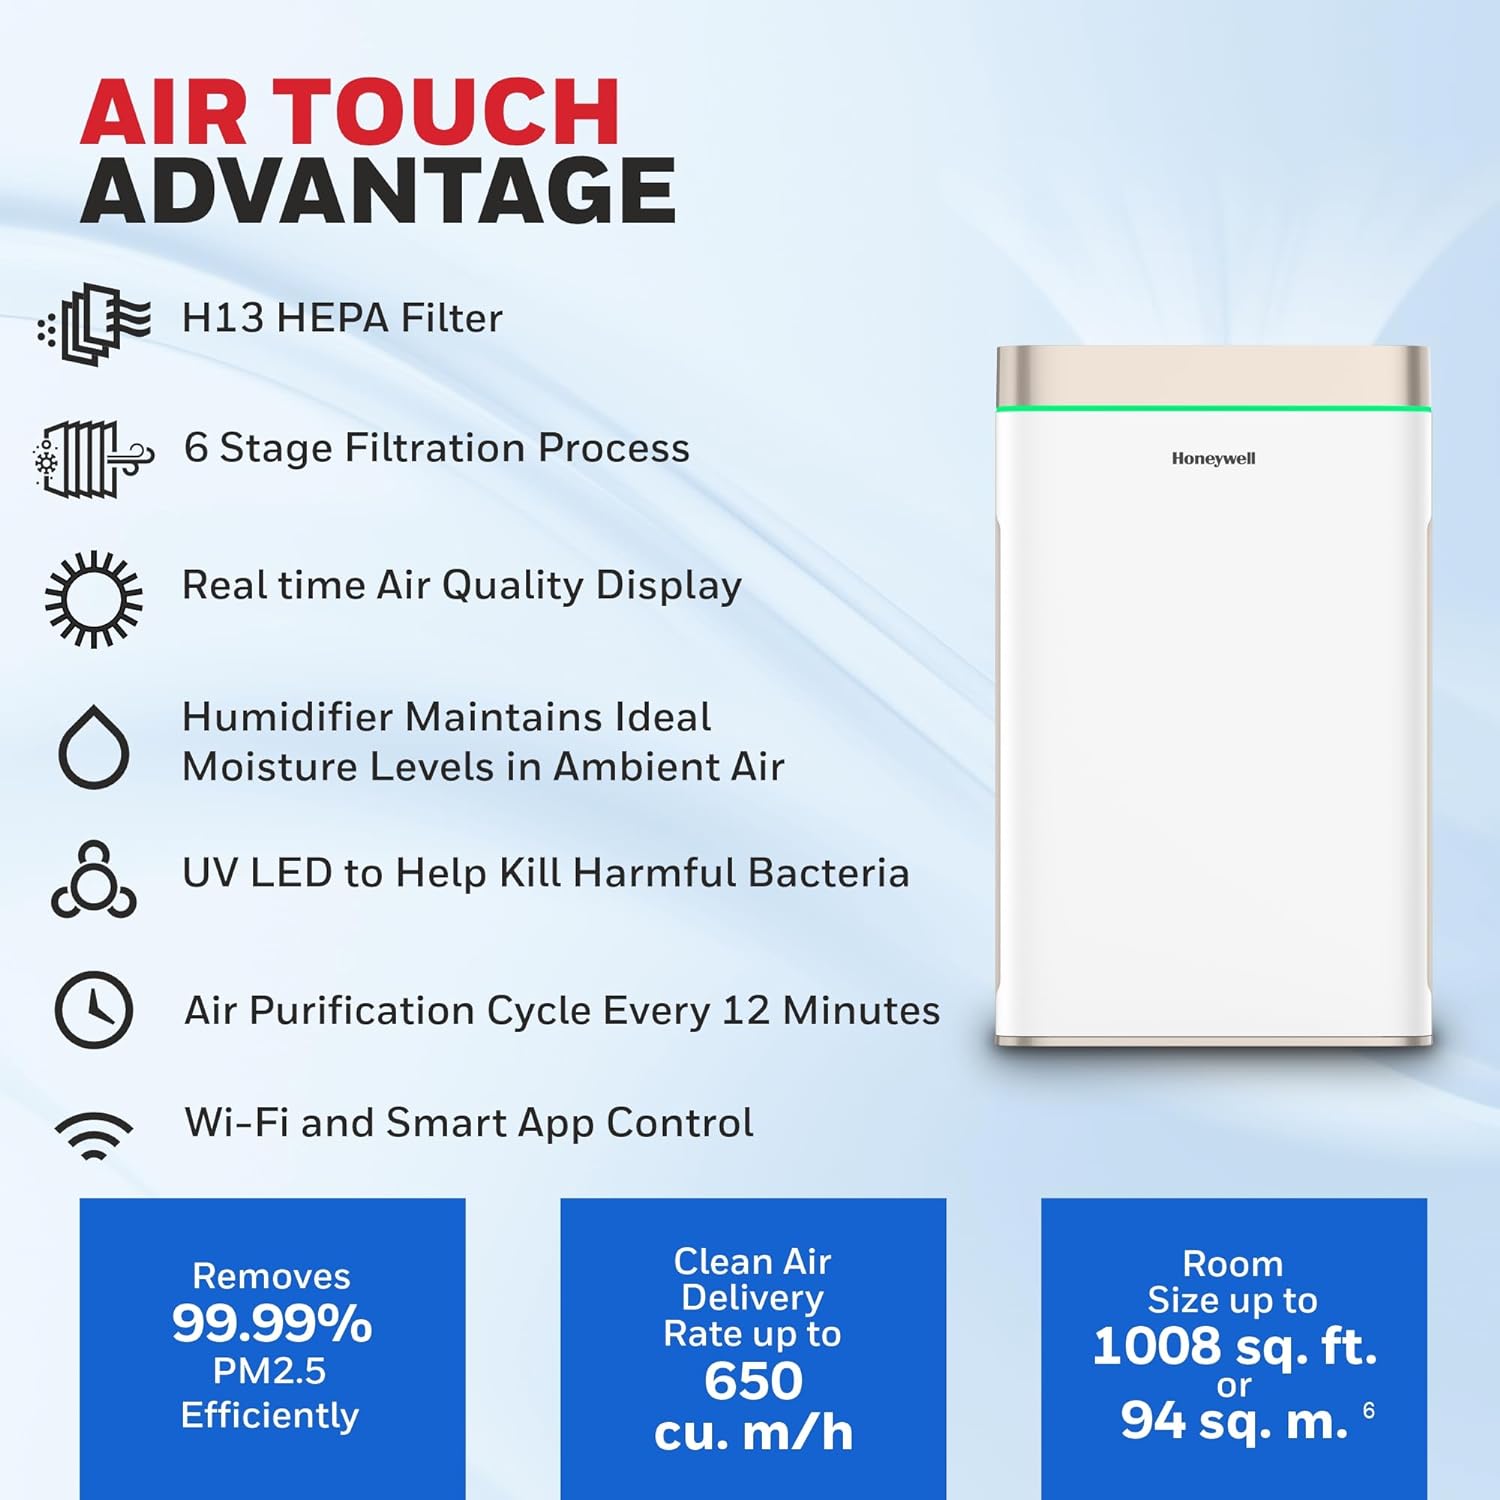 Honeywell Air touch U2 Indoor Air Purifier, Anti-Bacterial, Activated Carbon, H13 HEPA Filter,Removes 99.99% Pollutants Mahajan Electronics Online